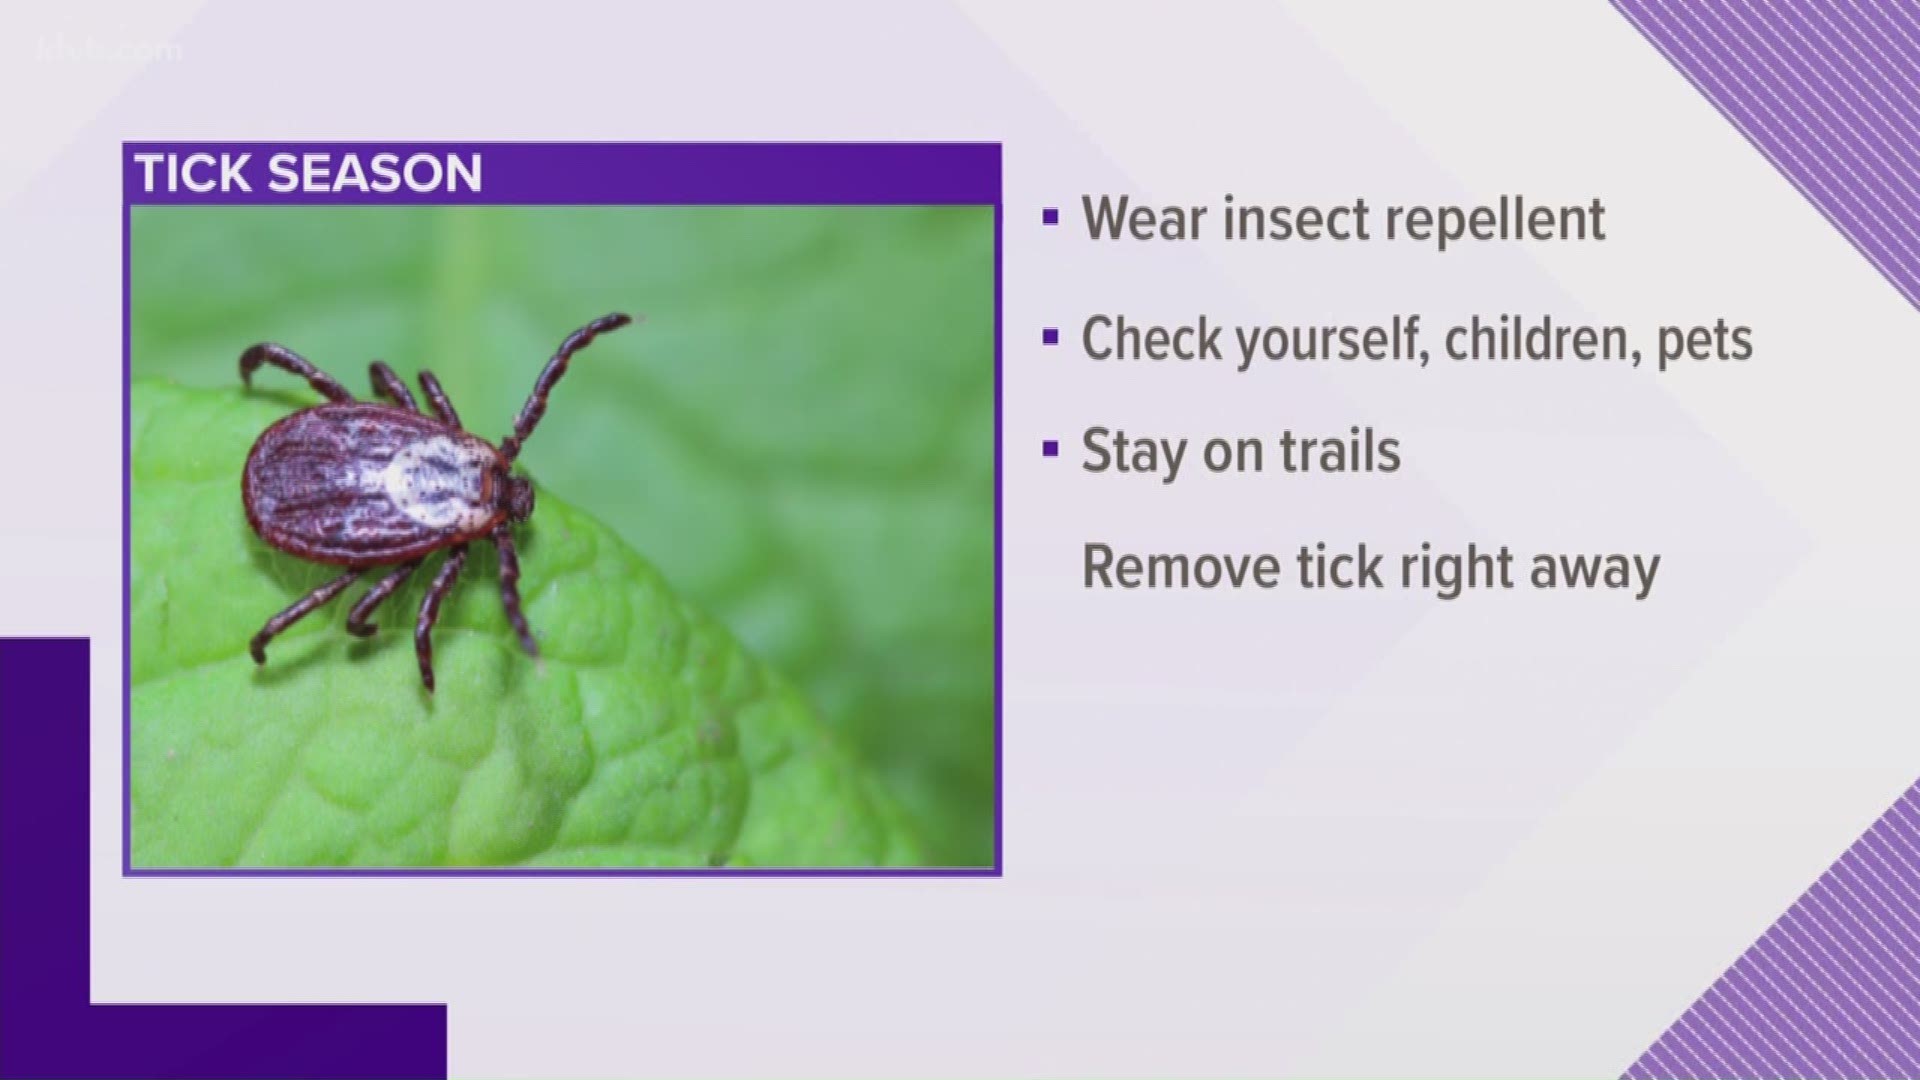 Ridge to Rivers warns people to watch out for ticks.